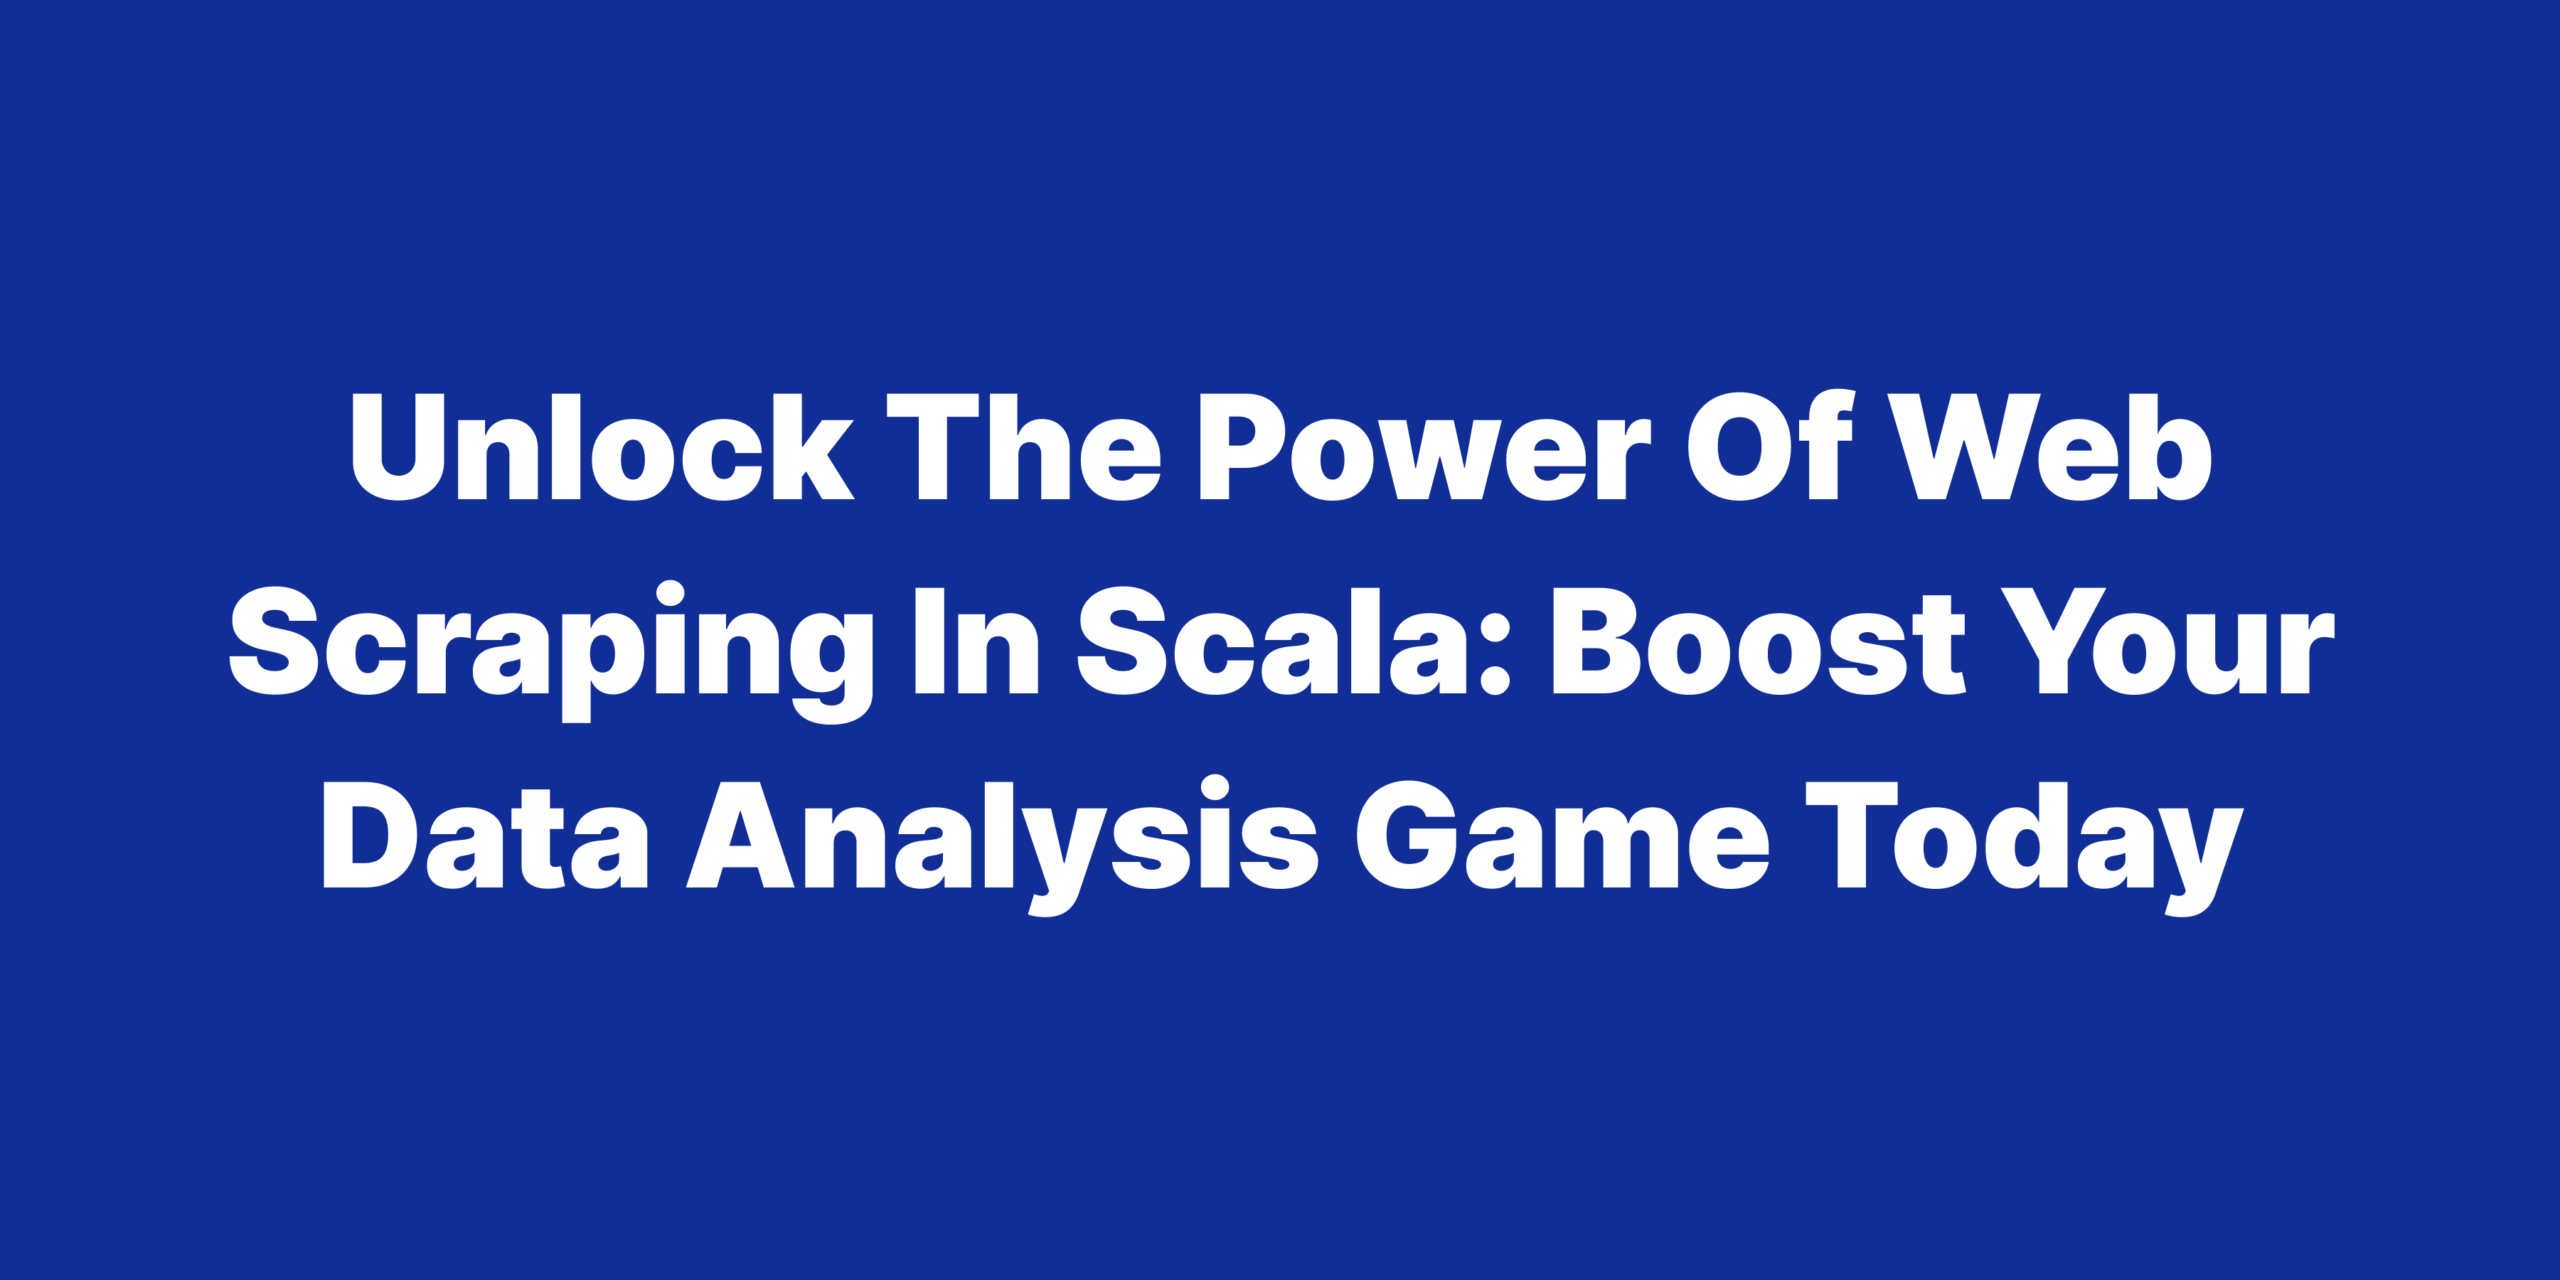 Unlock the power of web scraping in scala boost your data analysis Game today